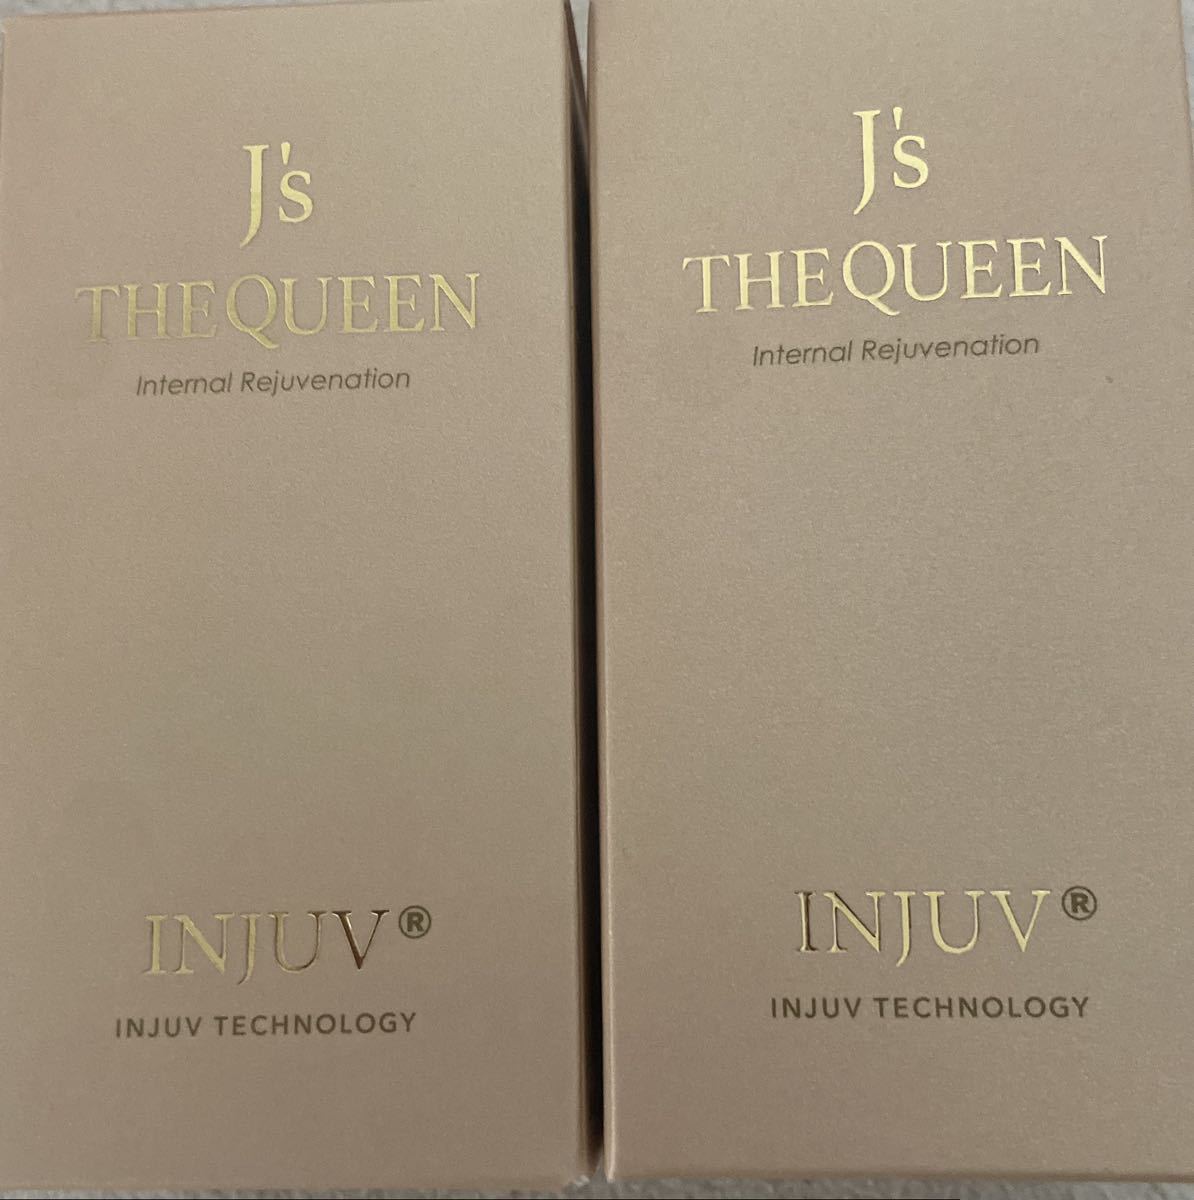 J*s THE QUEEN beauty supplement INJUV 300 bead in juvu